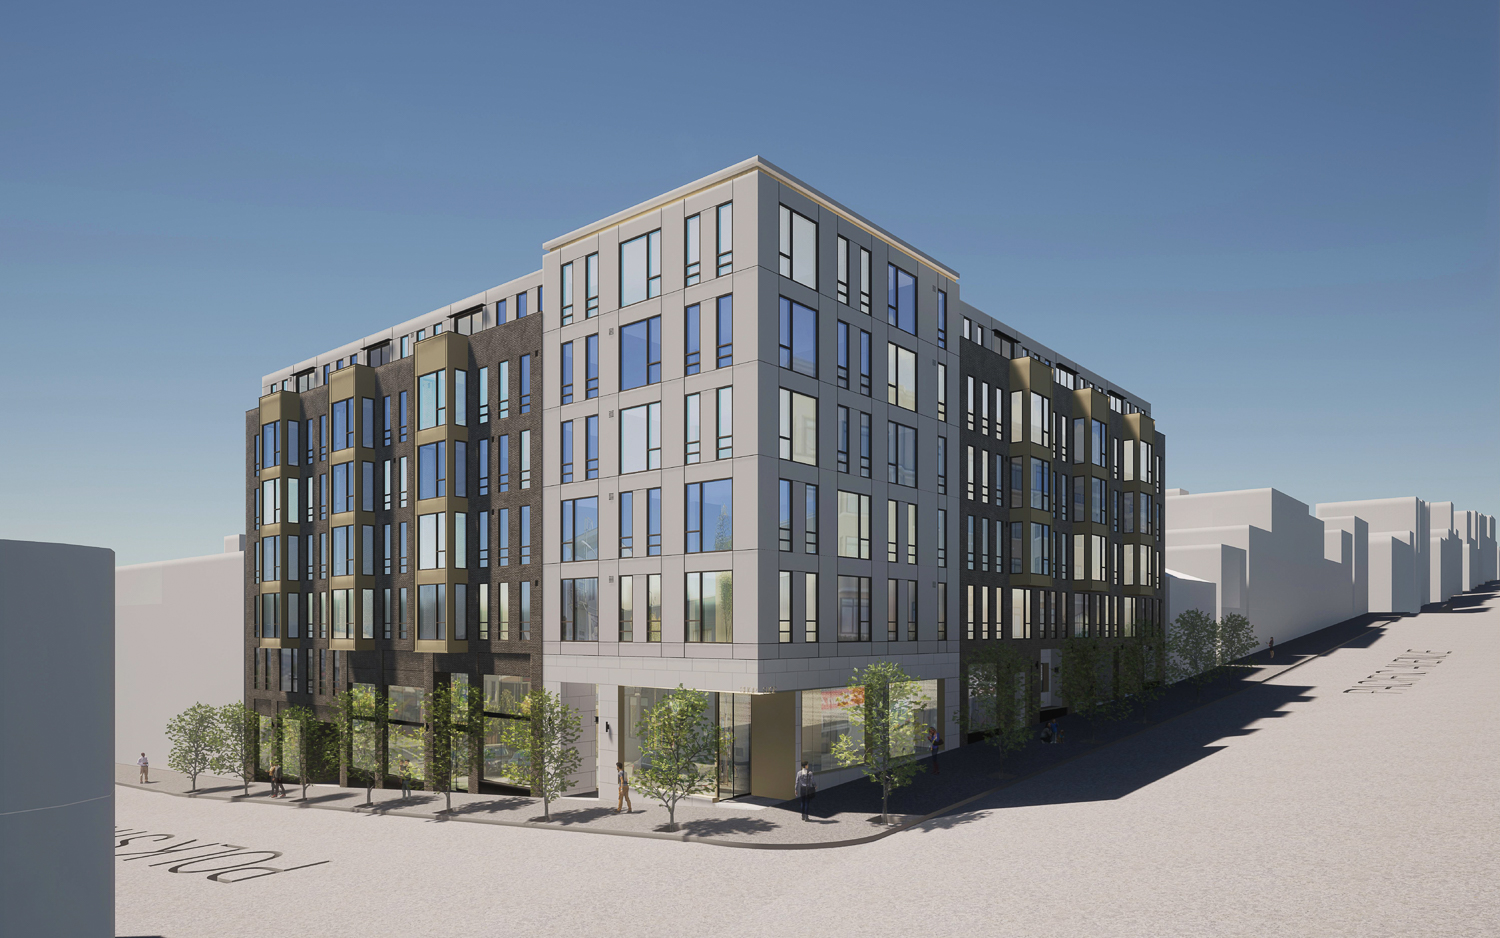 1580 Pacific Avenue, rendering by rg-architecture